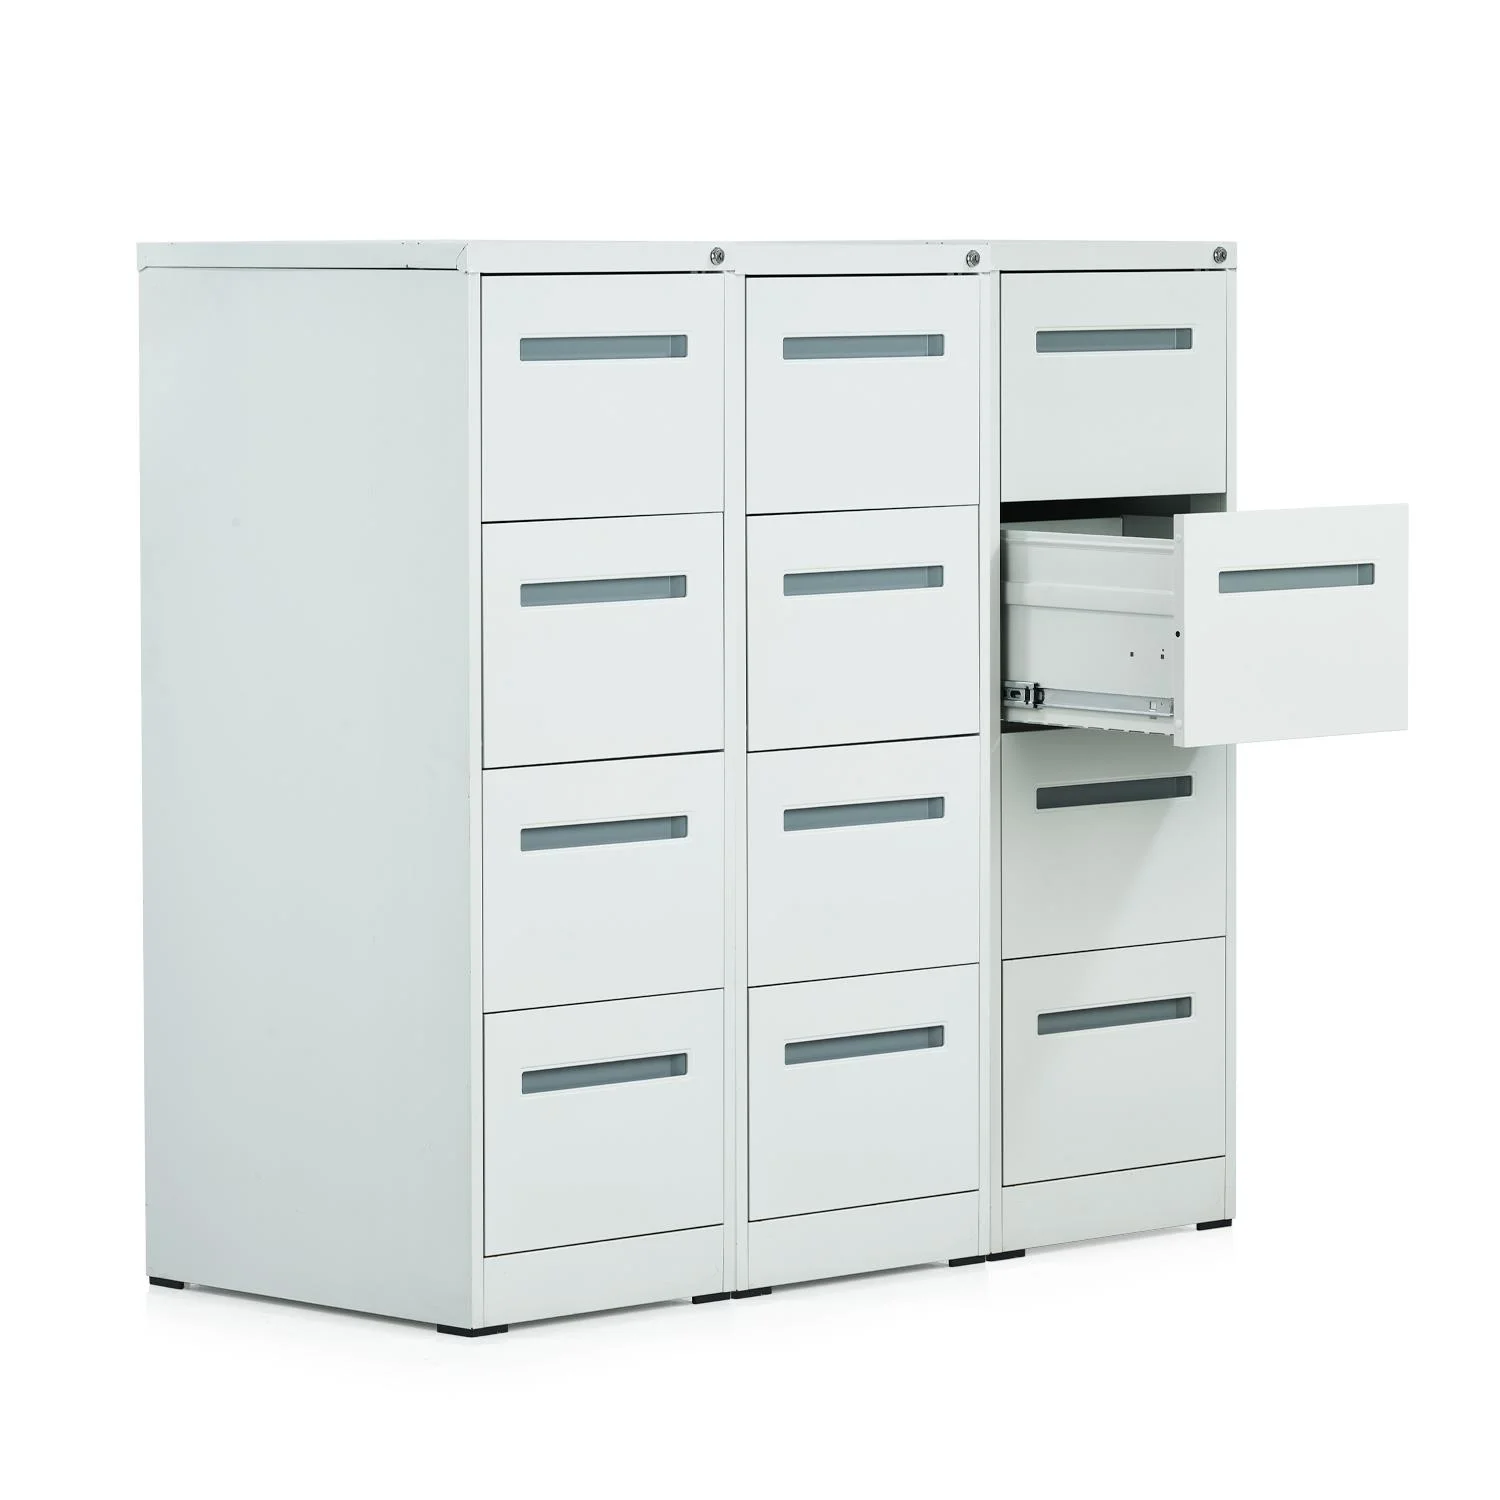 KD-009 Executive Filling Cabinets